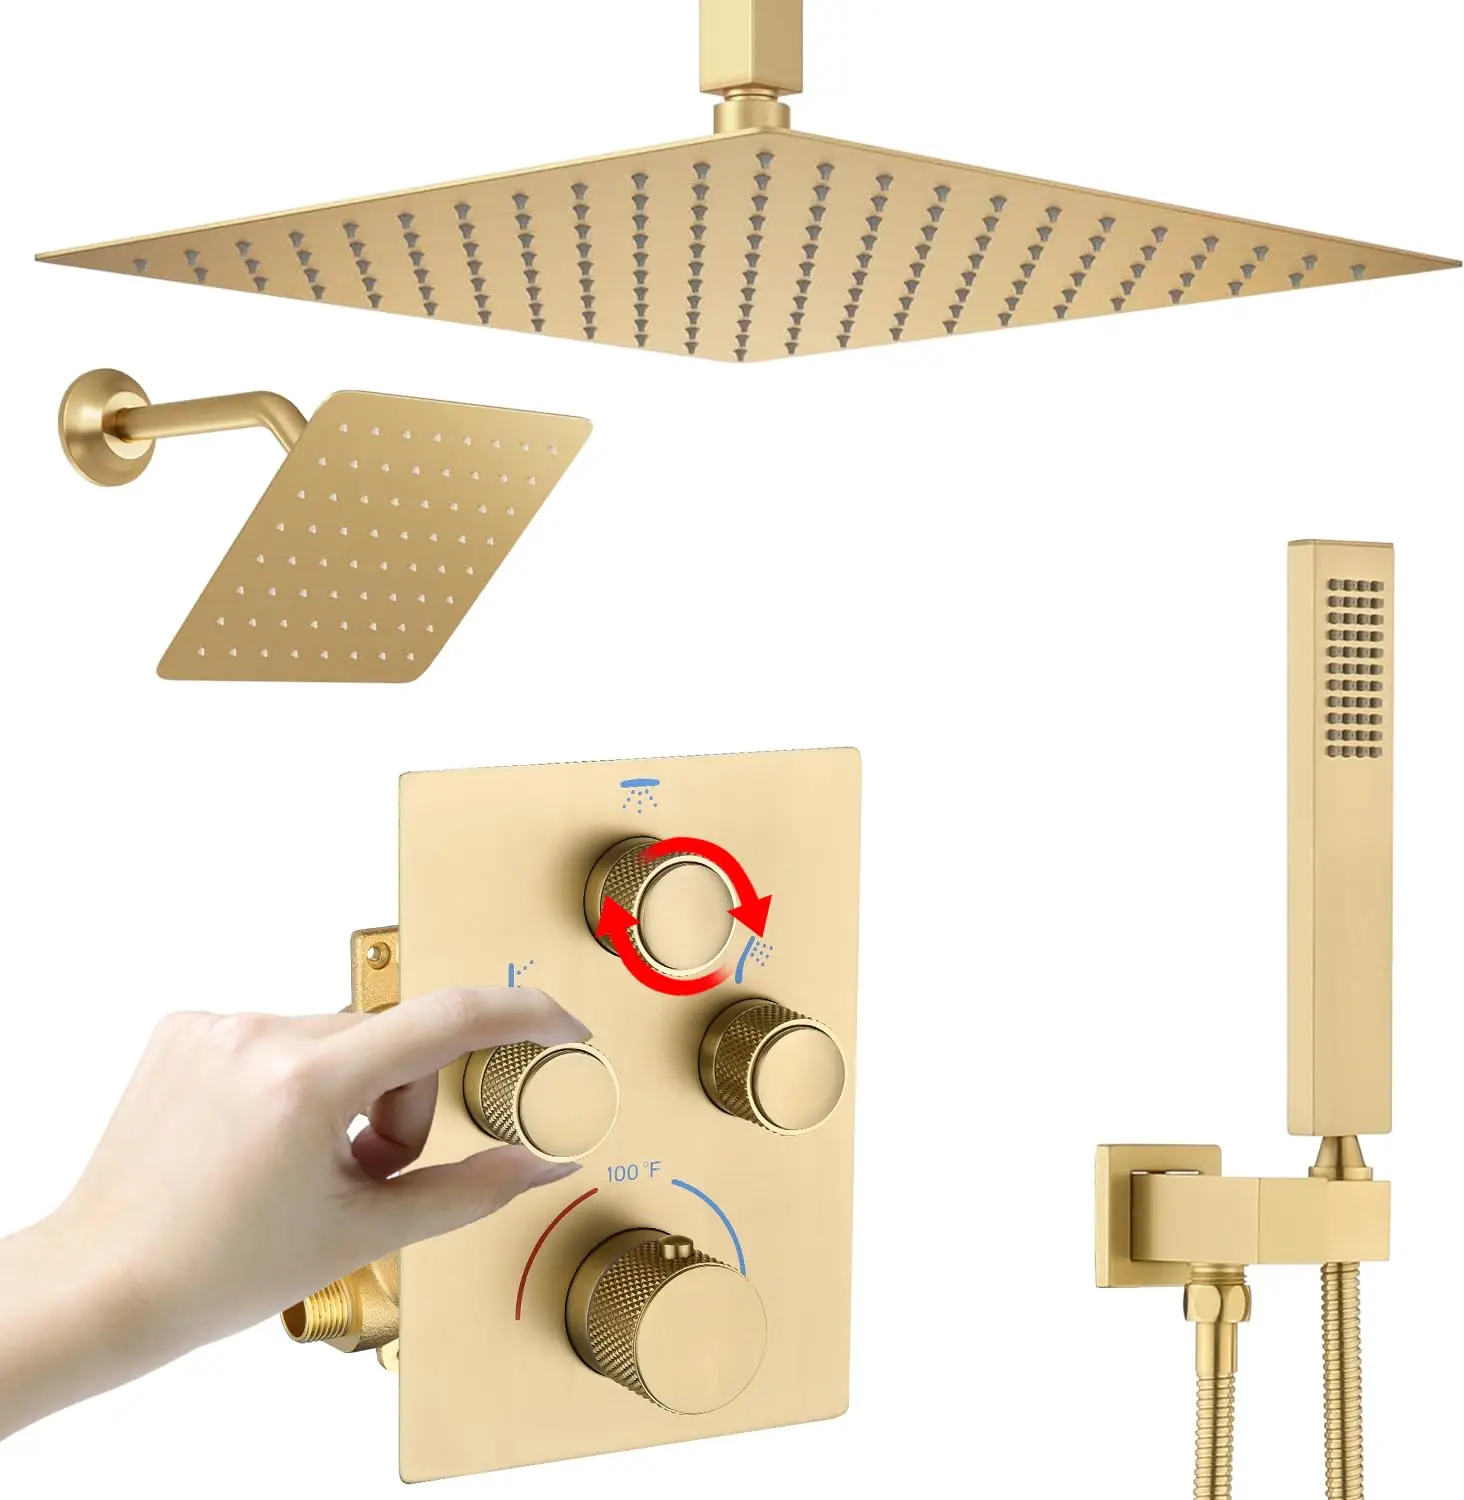 

Brushed Gold Brass Wall Mounted Dual Shower Heads Rainfall 3 Way Thermostatic Rain Bathroom Bath & Shower Faucet system set